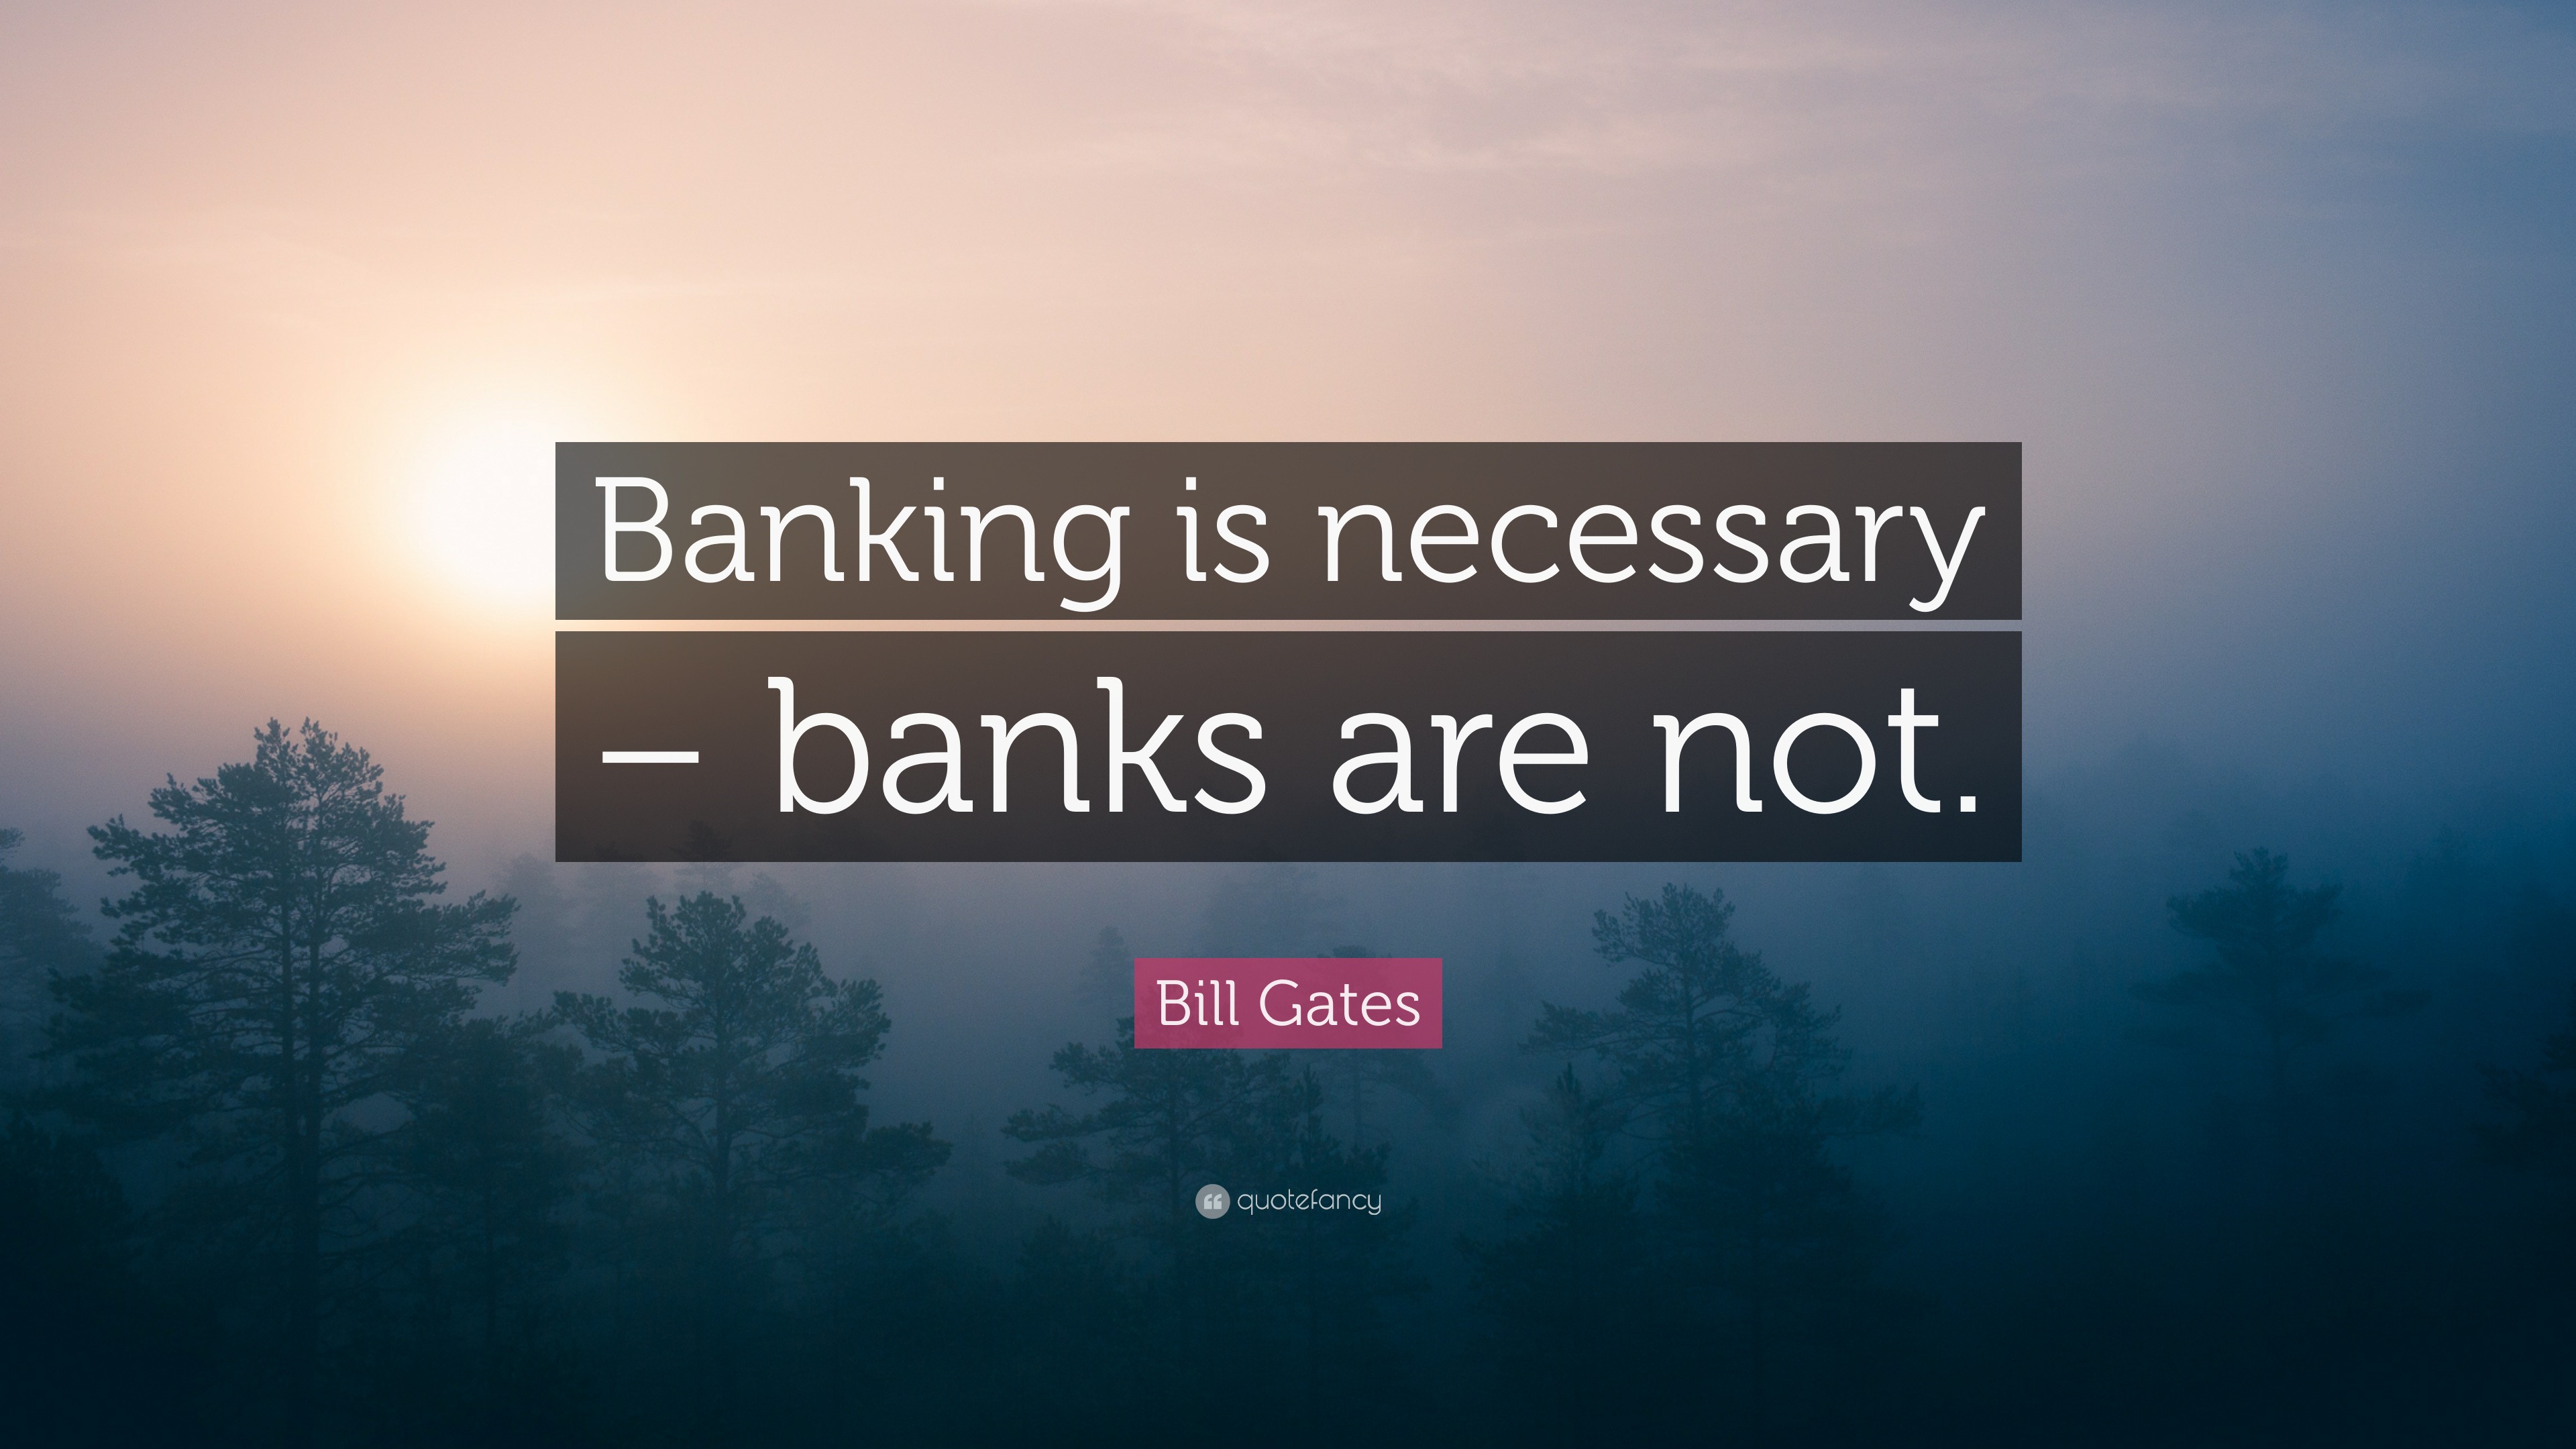 Bill Gates Quote: “Banking is necessary – banks are not.” (12